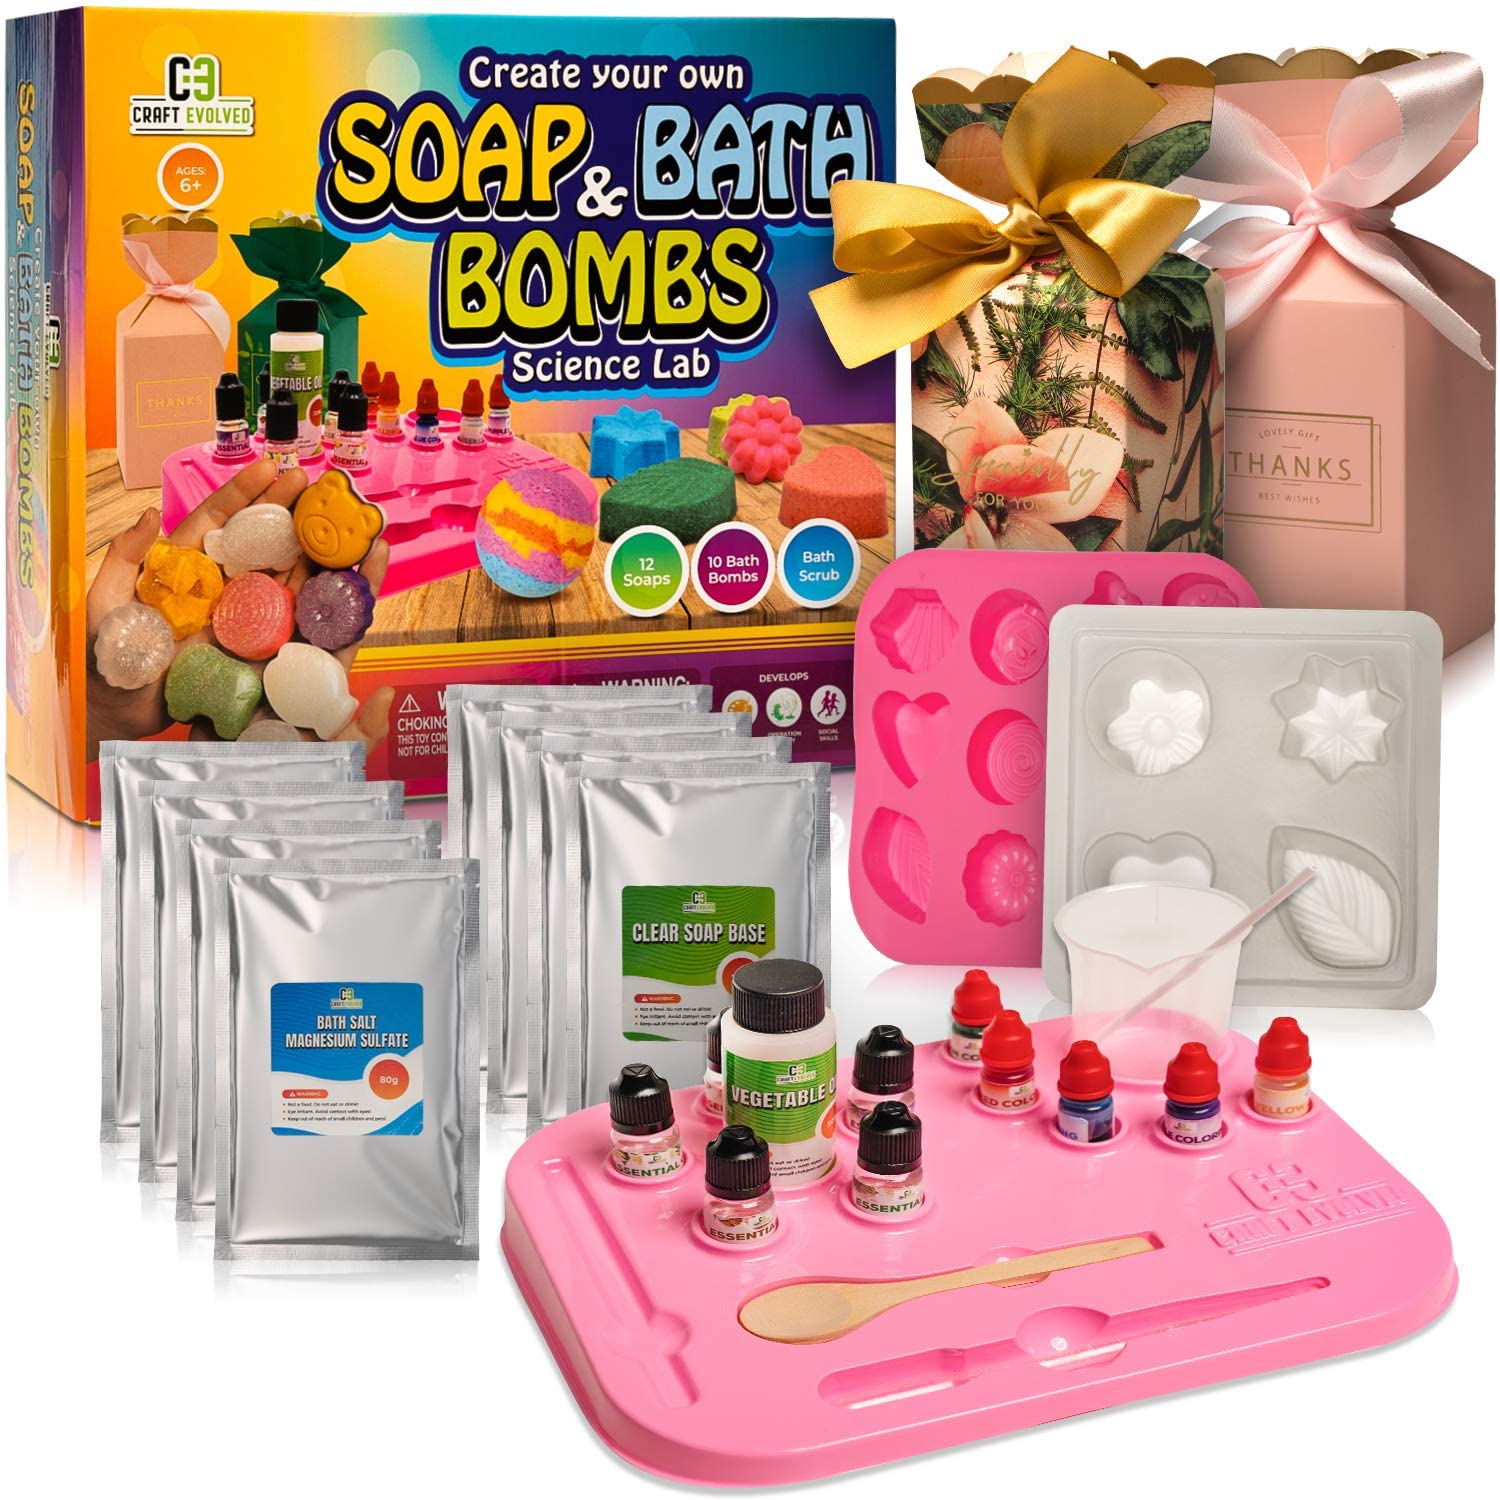 Bath Bomb Kit: 5 Best Bath Bomb Kits of 2021 for Home & Gifts